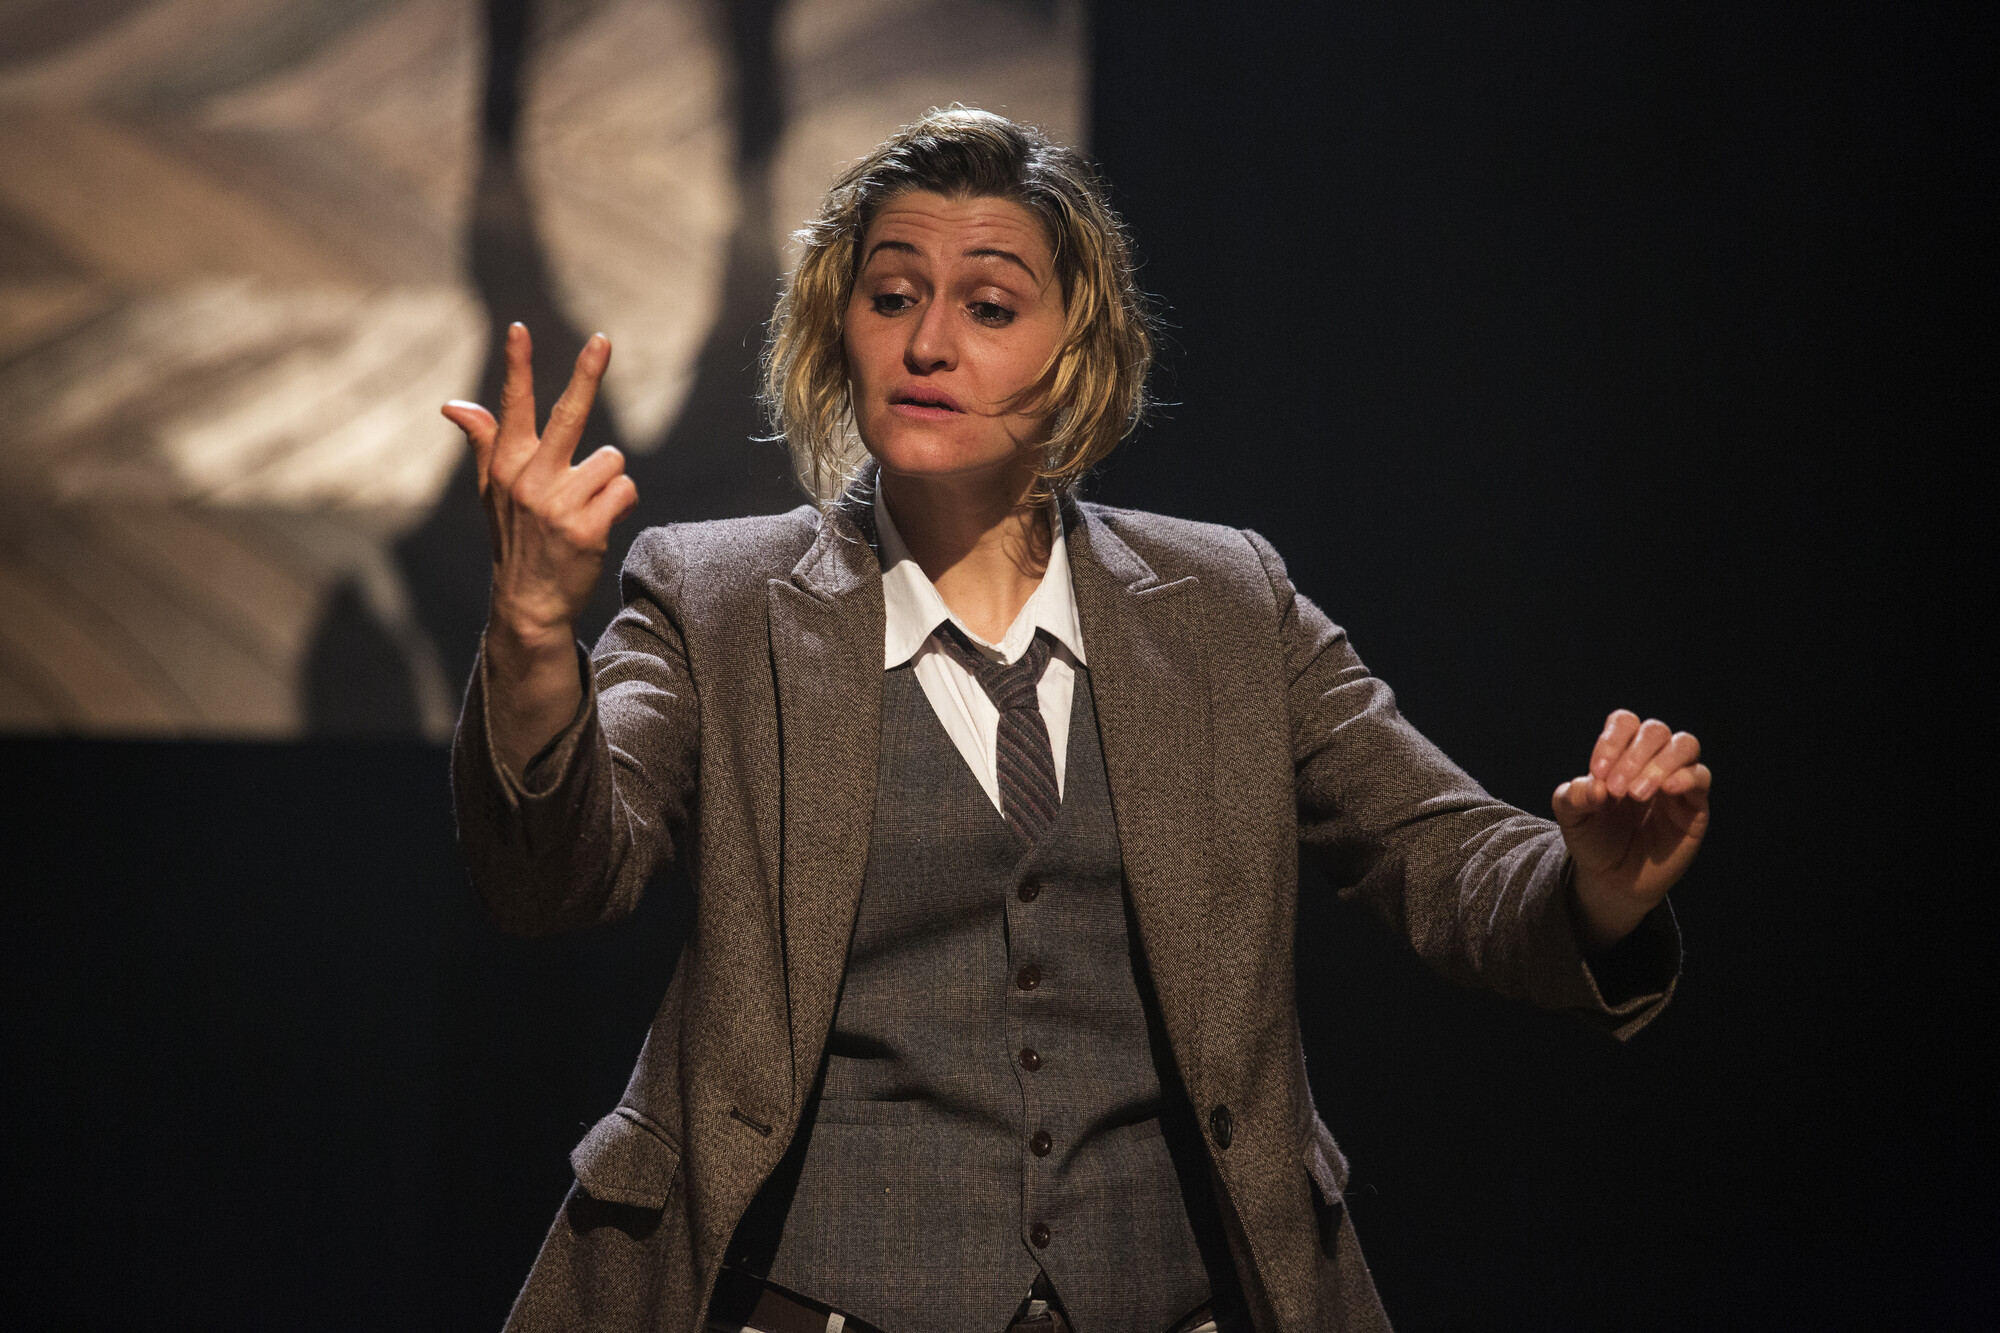 An actress in a suit performs onstage.